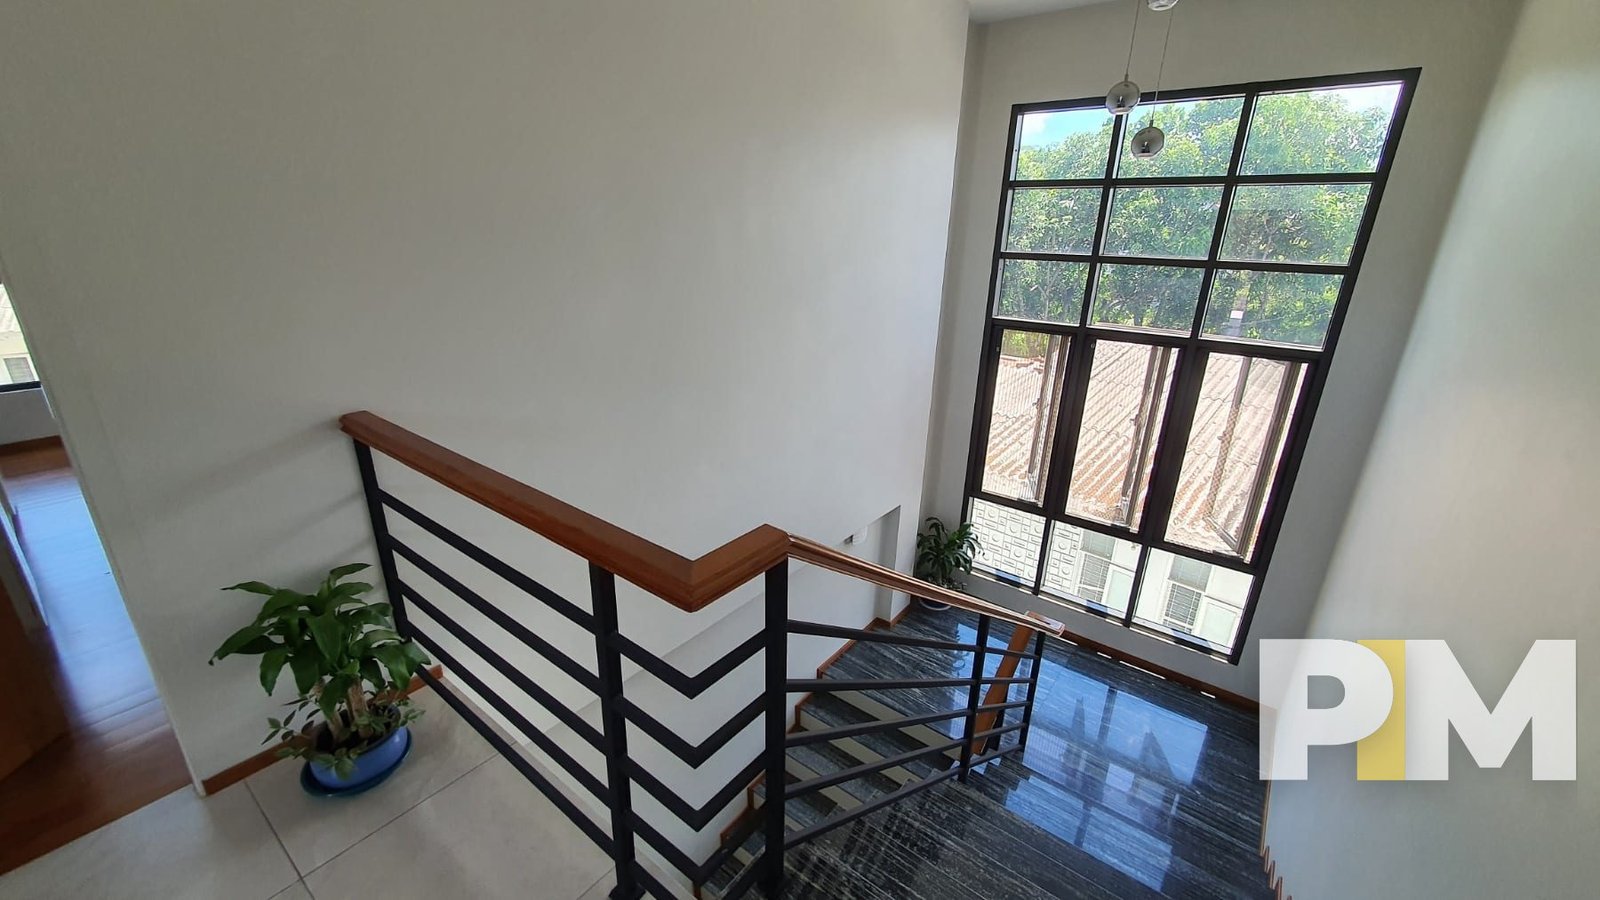 staircase with hanging light - properties in Yangon